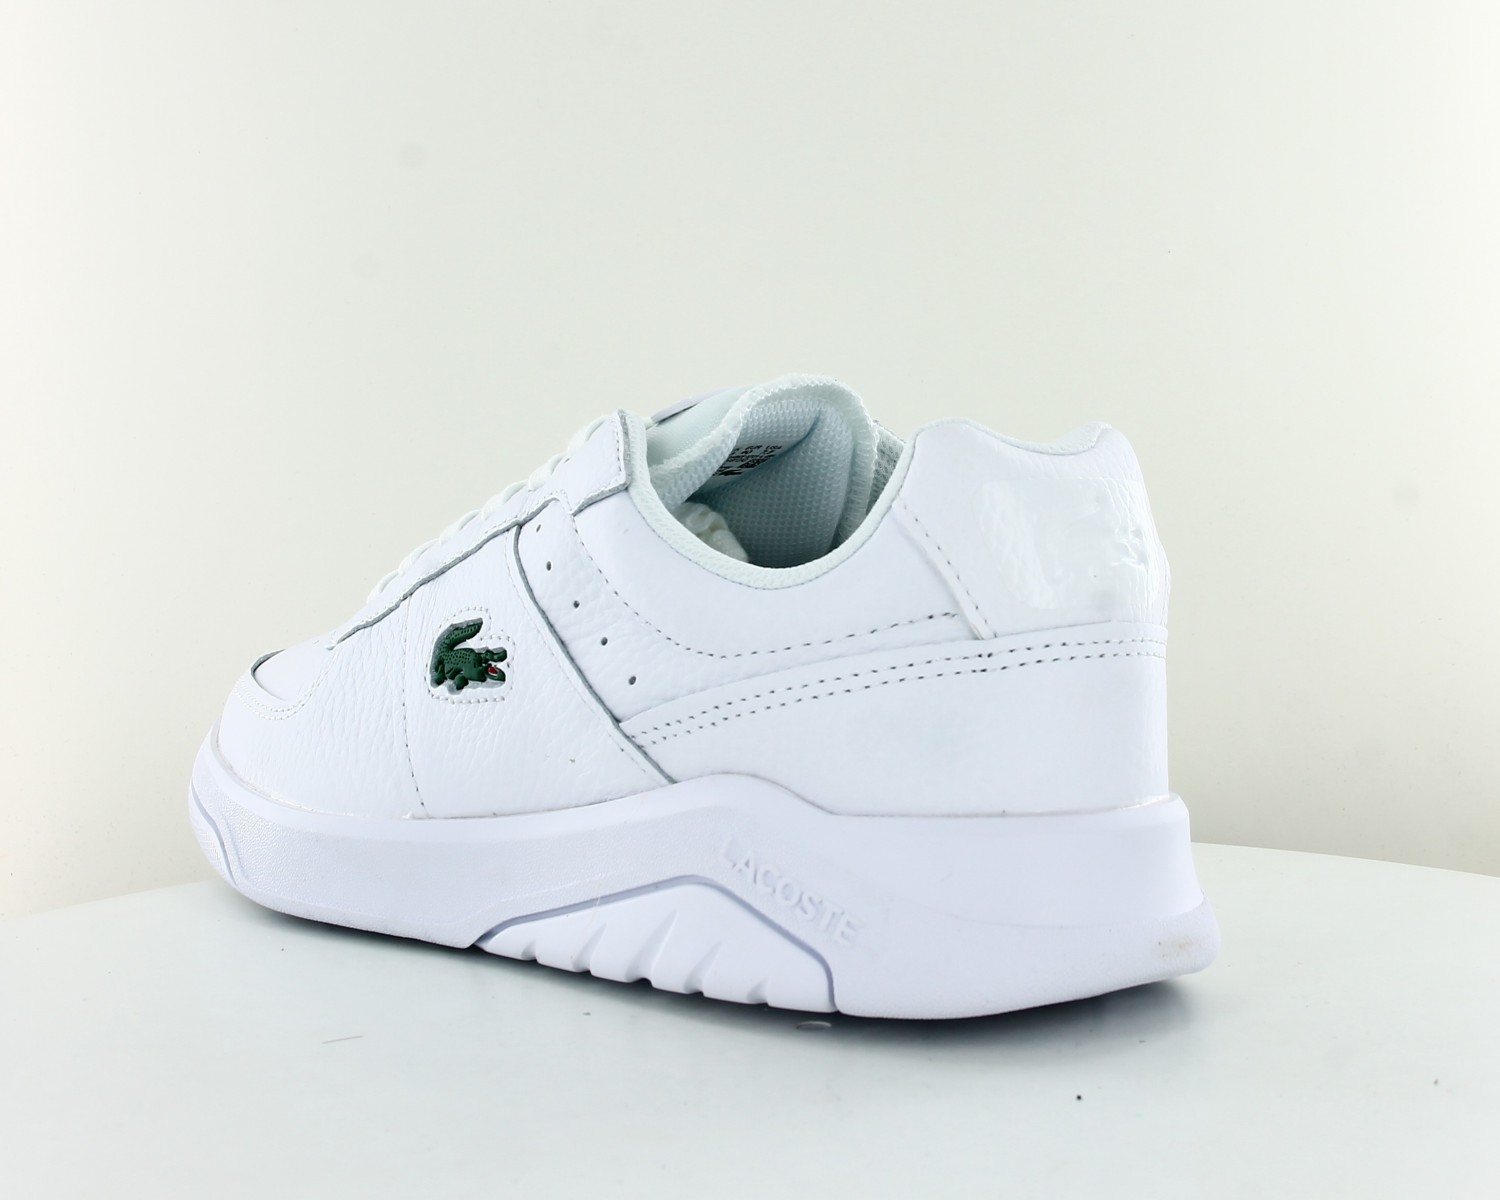 Lacoste Game Advance Blanc Or Branco - Sapatos Sapatilhas Mulher